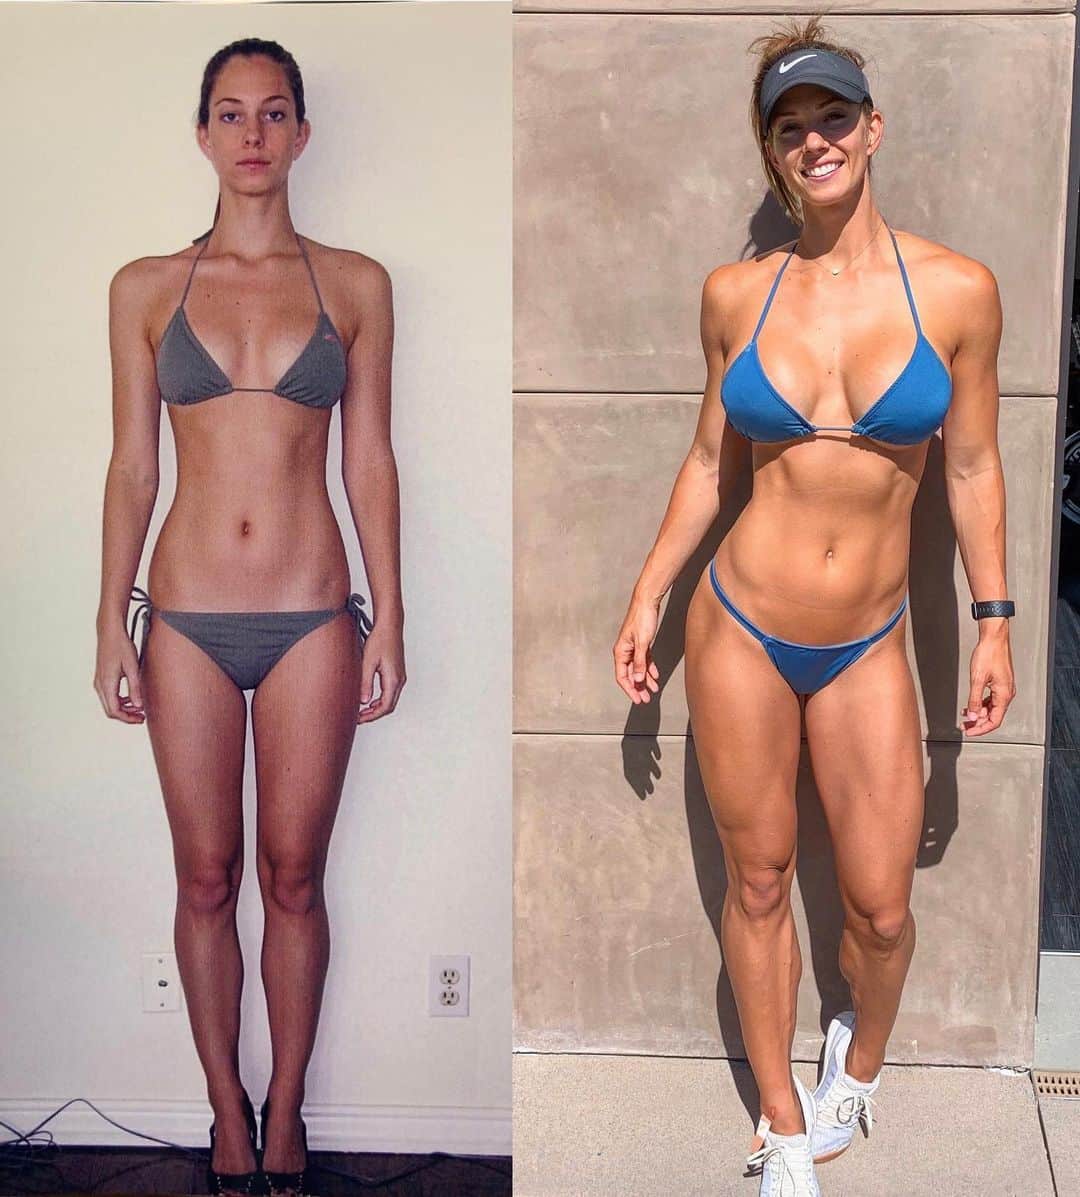 Janna Breslinさんのインスタグラム写真 - (Janna BreslinInstagram)「My 10 year transformation! 2009- 2019 👇🏻 & a quick synopsis about my journey⁣ ⁣ 2008- Completed a few years of track, cross country, gymnastics & pole vaulting. Pretty active my whole childhood.⁣ ⁣ 2008-2012- Went off to college and did allllllll the cardio.⁣ ⁣ 2013 - Tried P90X for a hot minute and then started “lifting” on my own to prep for NPC bikini competitions. But really had no clue what I was doing lol.⁣ ⁣ 2014- Did well competing but took a break. Then found health problems that have taken me years to sort out. Heavy metal toxicity, 40 food intolerances, hormone imbalances, constant infections, systemic candida, gut problems, methylation issues, cancer scare, etc. Lost all fat and muscle on my body and got down to 110 lbs (im 5’8” and currently 135/140 lbs).⁣ ⁣ 2015- Read, learned, healed. Did my last bikini show. Worked out for fun/ did my own thang.⁣ ⁣ 2016-2017- F45, hot yoga, other random stuff.⁣ ⁣ 2017- Got bored, transitioned into weightlifting, crossfit style workouts, and more functional training. Started noticing more serious gains.⁣ ⁣ 2019- Mostly my own workouts, weightlifting, crossfit, and now a Spartan race!⁣ ⁣ ⬇️ Some key points I’ve learned in the past 10 years‼️⁣ ⁣ ▪️FOOD IS FUEL not an enemy.⁣ ▪️You don’t need to be obsessive about food & fitness to see results. It should be an enjoyable journey.⁣ ▪️Food & fitness should NOT take over your life.⁣ ▪️One or a few “cheat meals” will not ruin your progress... they can actually be beneficial sometimes!⁣ ▪️You should enjoy the way YOU do fitness. What’s right for you may not be what’s right for someone else.⁣ ▪️F&CK THE SCALE.⁣ ▪️Carbs and/or fat are NOT bad. They are both important for health and hormones.⁣ ▪️Cardio is NOT the only way to burn fat.⁣ ▪️You do not need to workout hours everyday to see results.⁣ ⁣ If you’re interested in my workouts, recipes, and recovery programs 📲Download my iOS app! ✅ Less than $2 a week!! The link is in my bio!」10月6日 2時47分 - jannabreslin